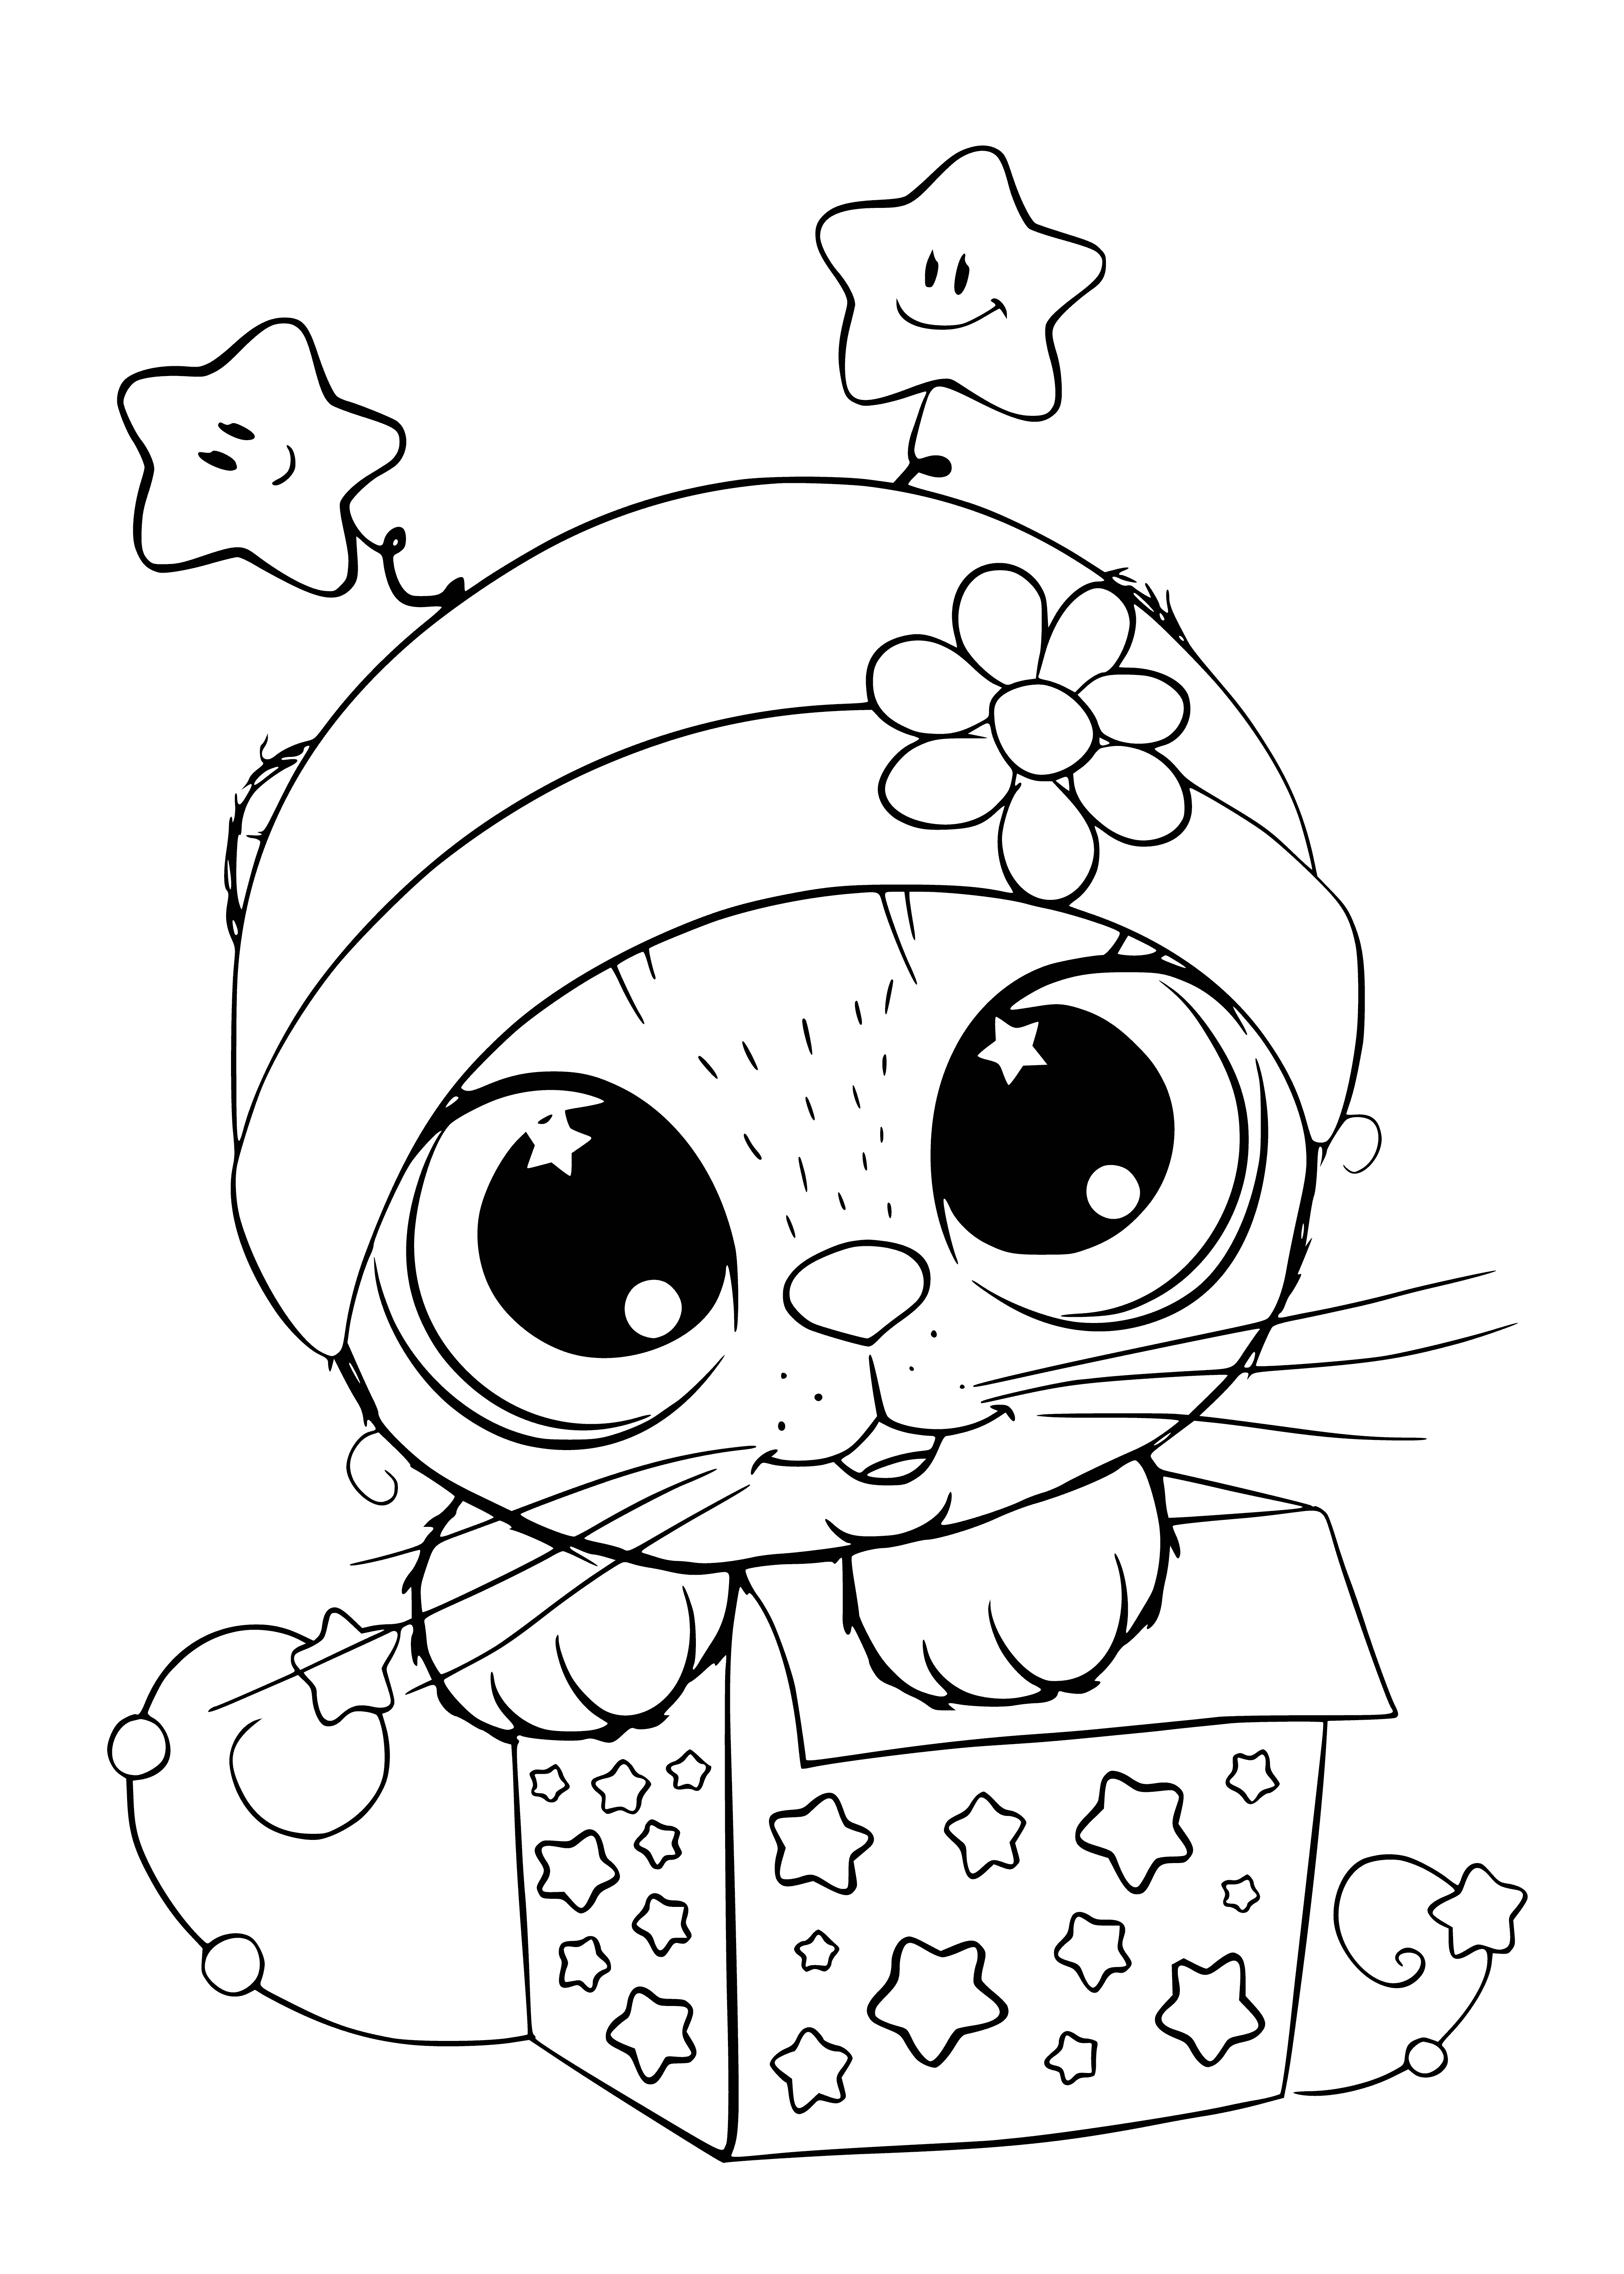 coloring page: Small, light-colored cat in a cardboard box, poking head through the hole. Bright eyes, cute nose, whiskers, and a playful smile! Ears perky and alert.